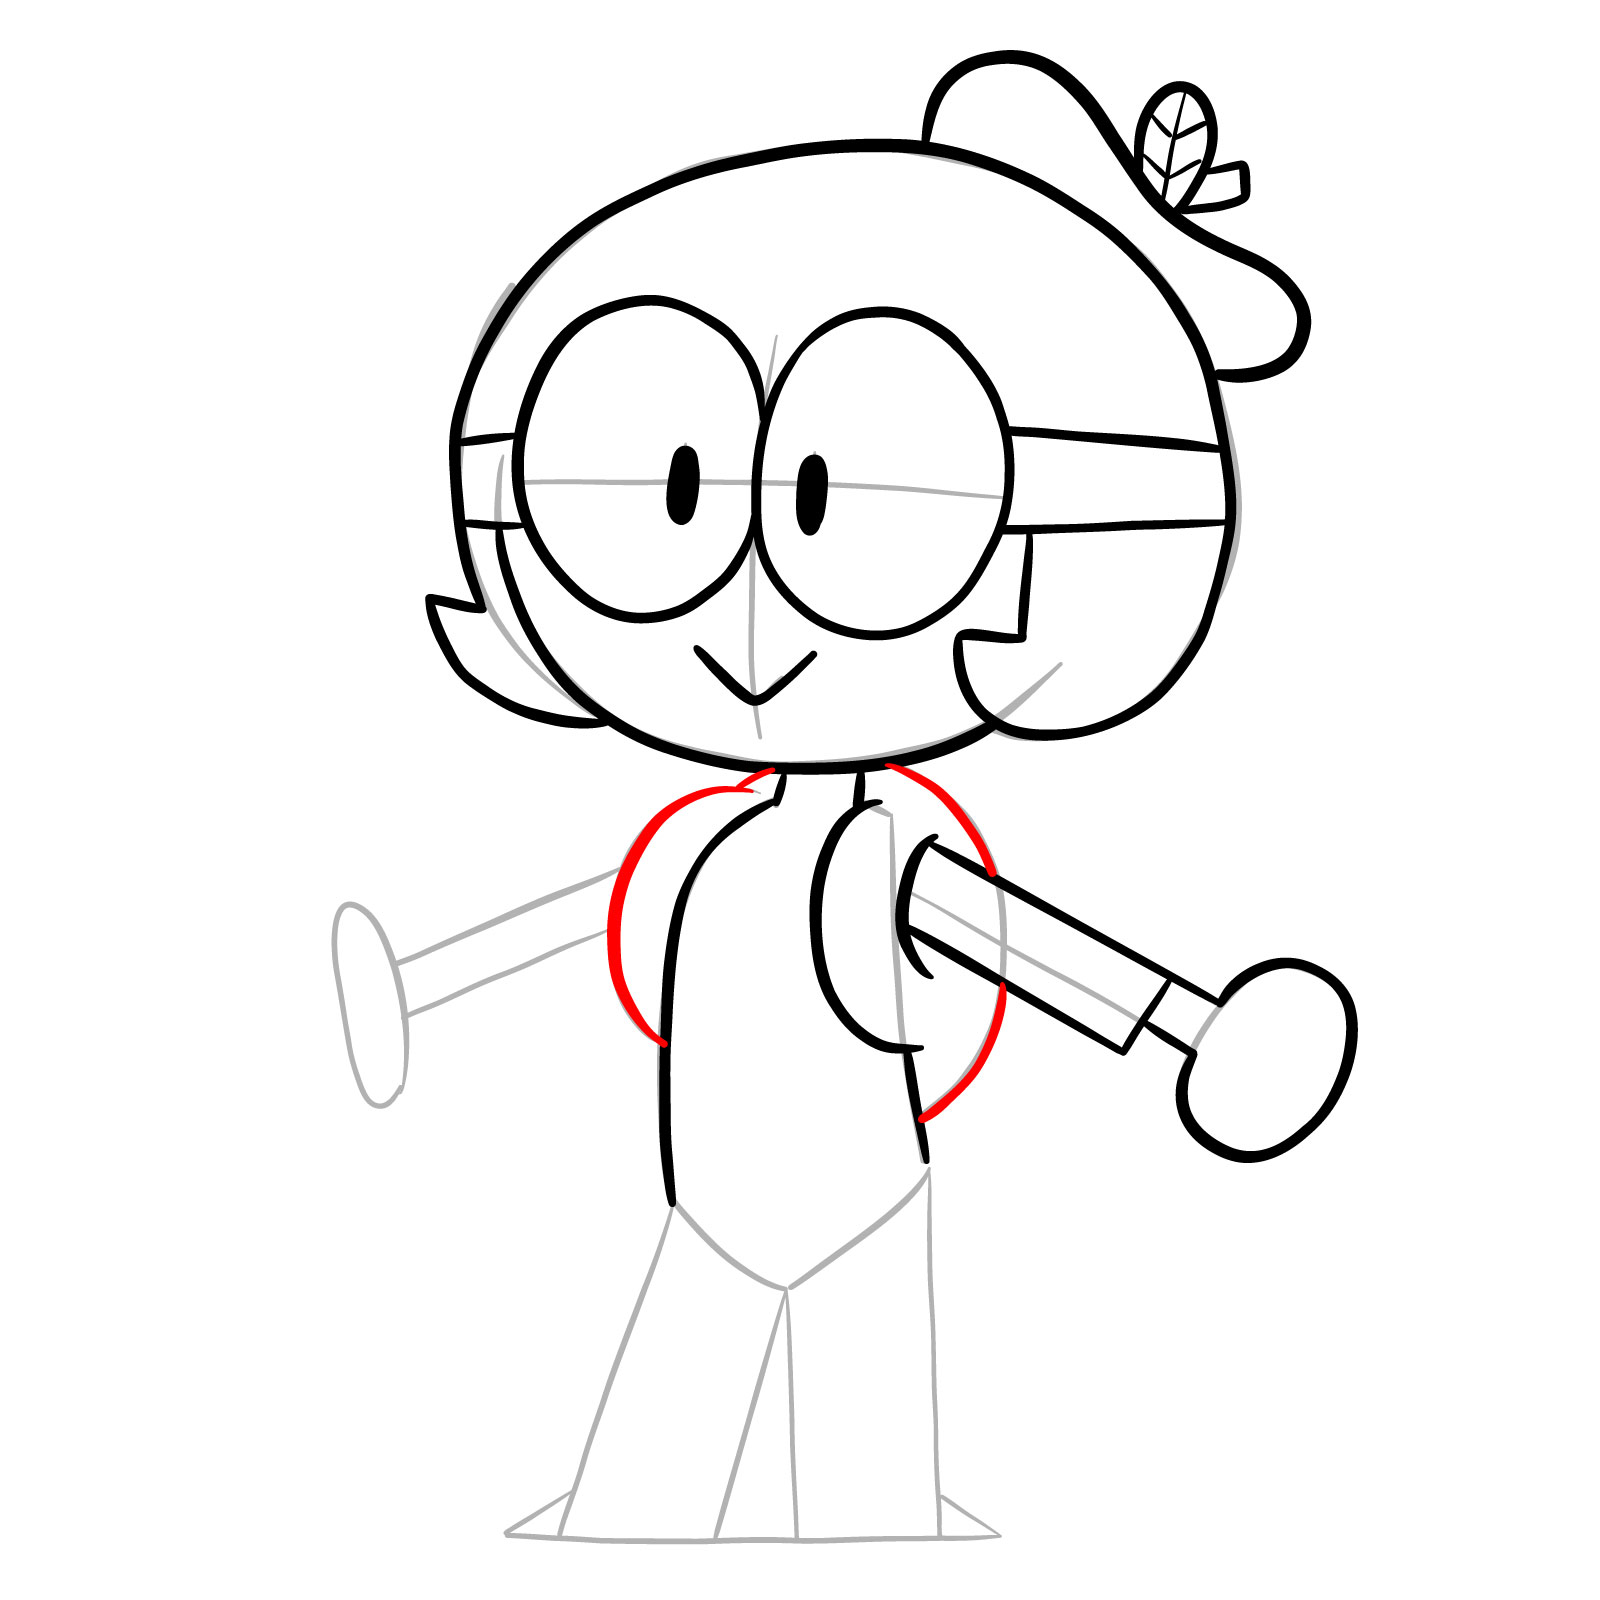 How to draw Dendy from OK K.O.! - step 15